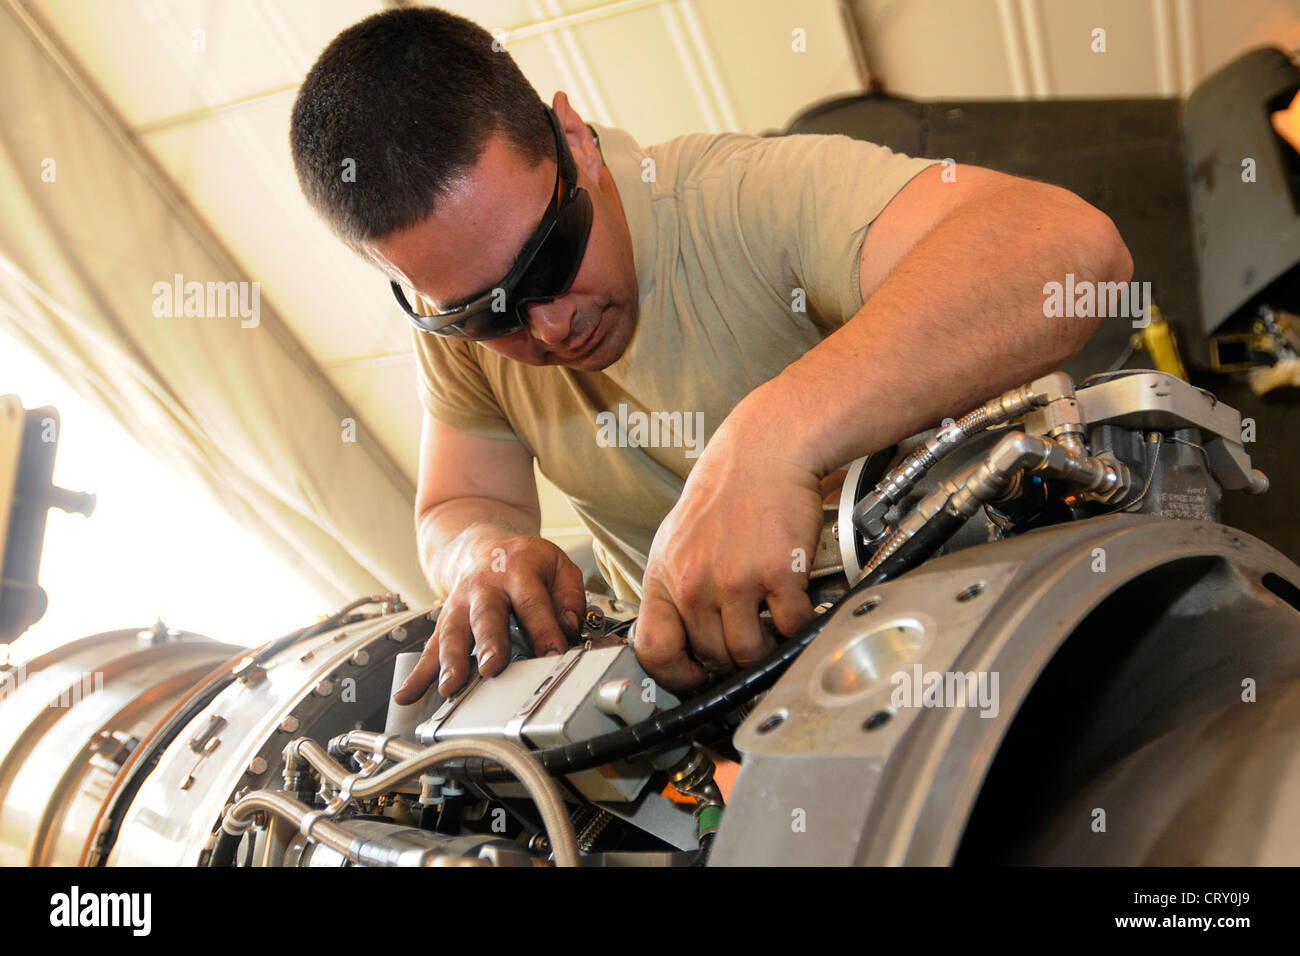 U.S. Army Sgt. Michael Johnson, an engine mechanic, works on the engine for a CH-47 Chinook at Kandahar Airfield, Afghanistan on July 3, 2012. Johnson, a native of Riverside, Calif., is currently deployed to Afghanistan with Delta Company, 3rd Battalion, 25th Aviation Regiment out of Wheeler Army Airfield, Hawaii. Stock Photo